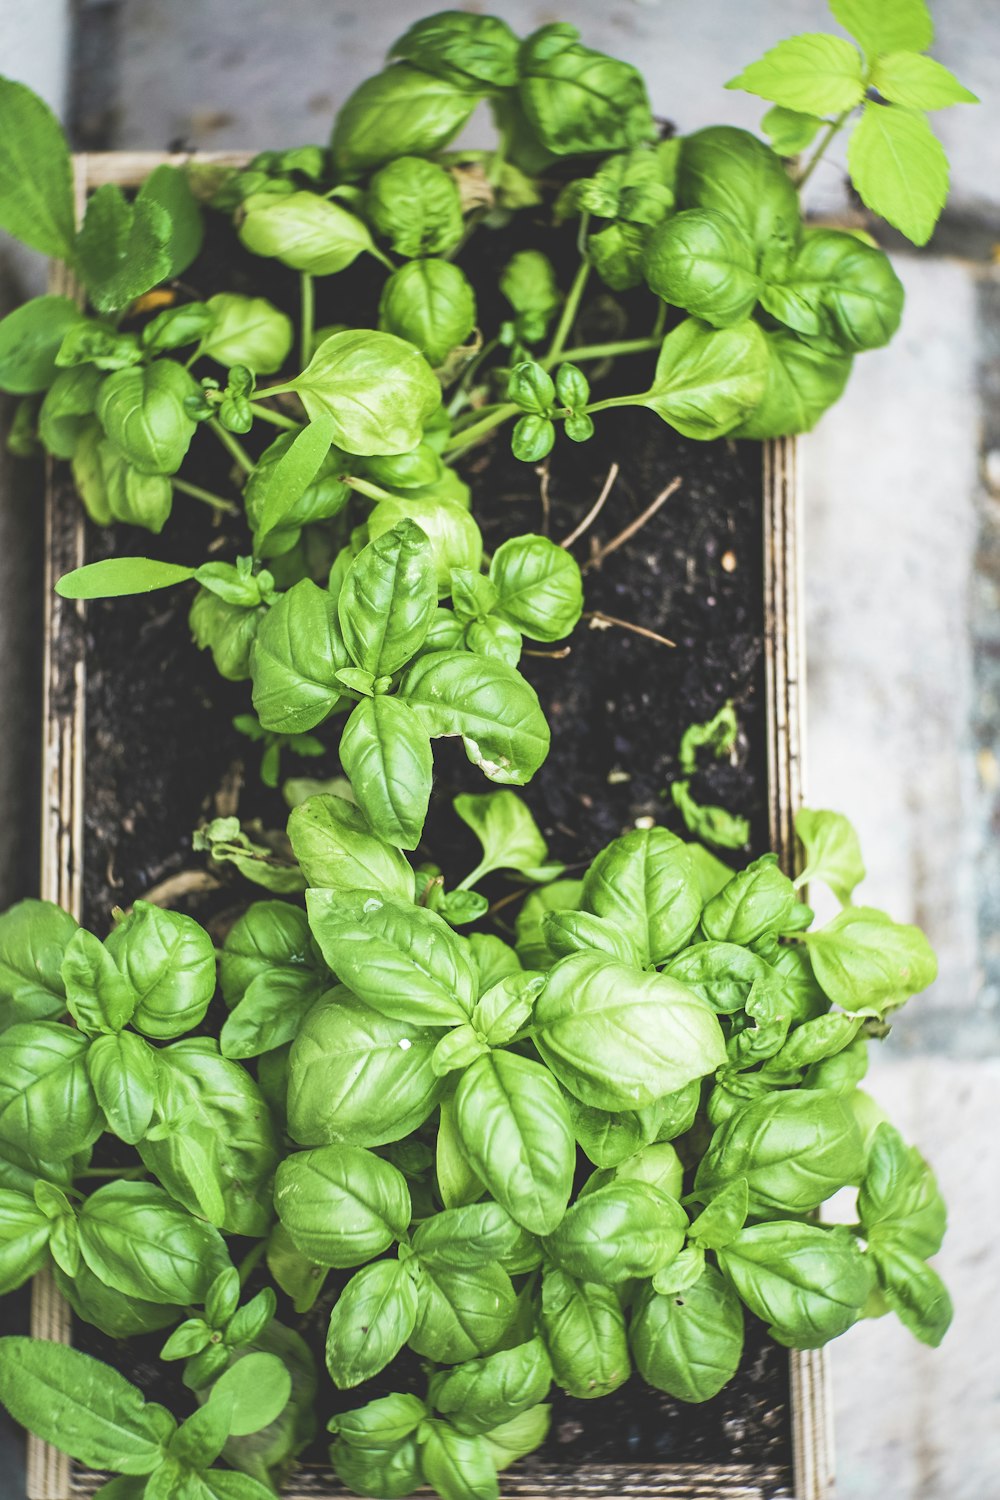 Basil Leaf Herb Benefits And Uses Around The Home